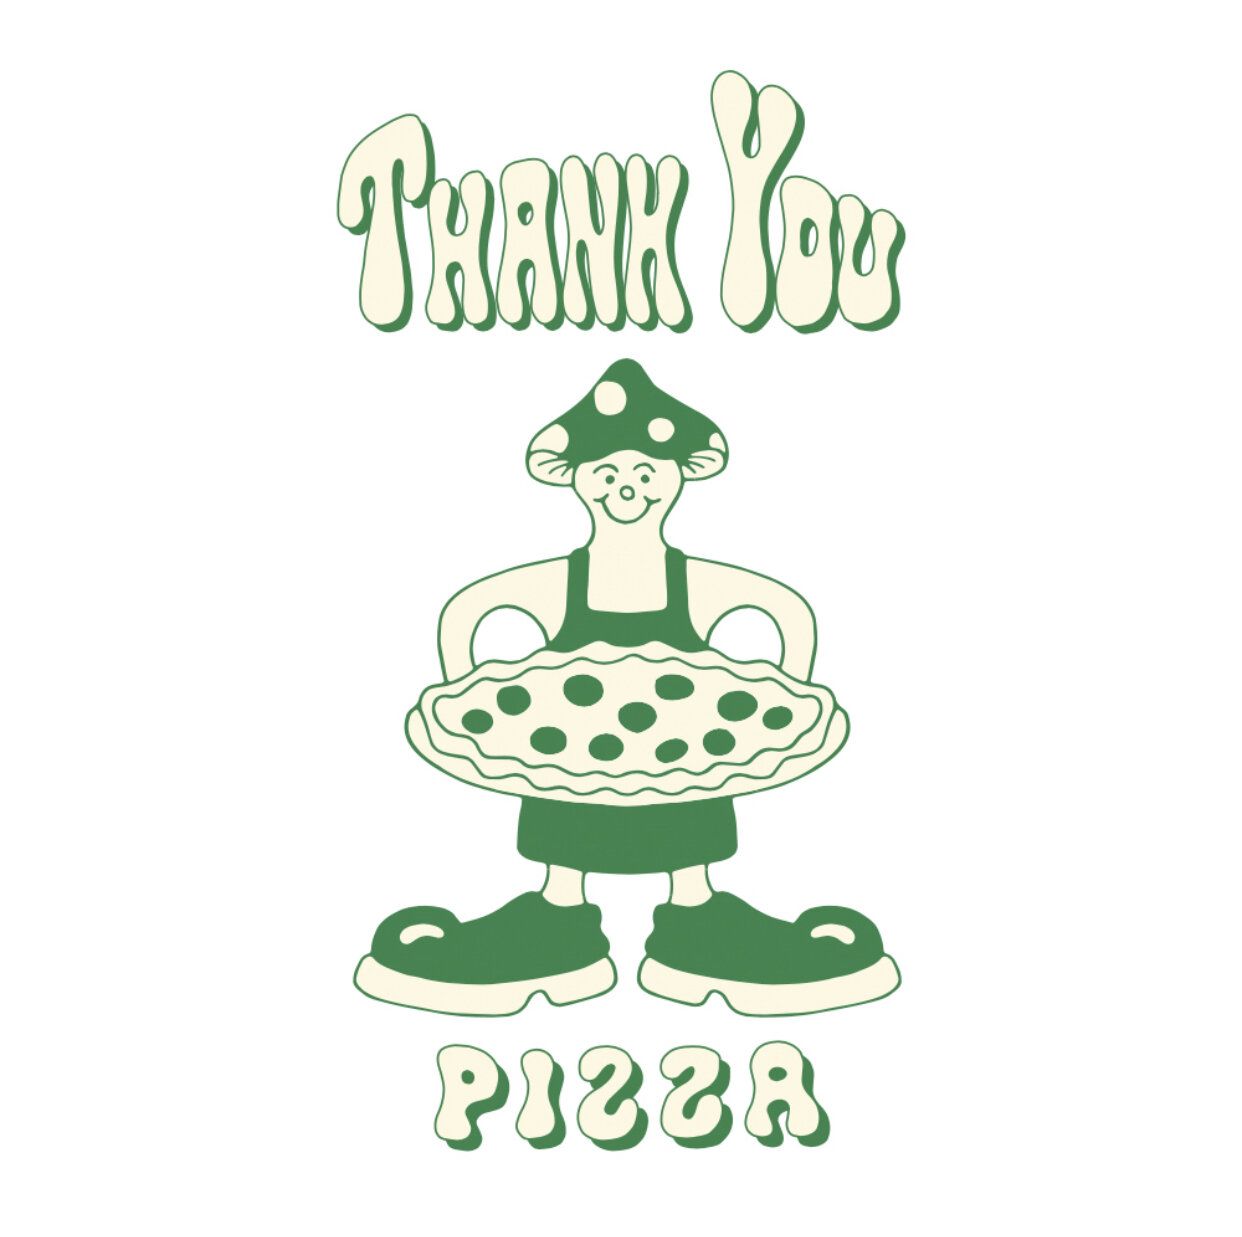 The Thank You Pizza logo is a cartoon mushroom man holding a pizza with thank you above his head and pizza under his feet in a bubbly font.